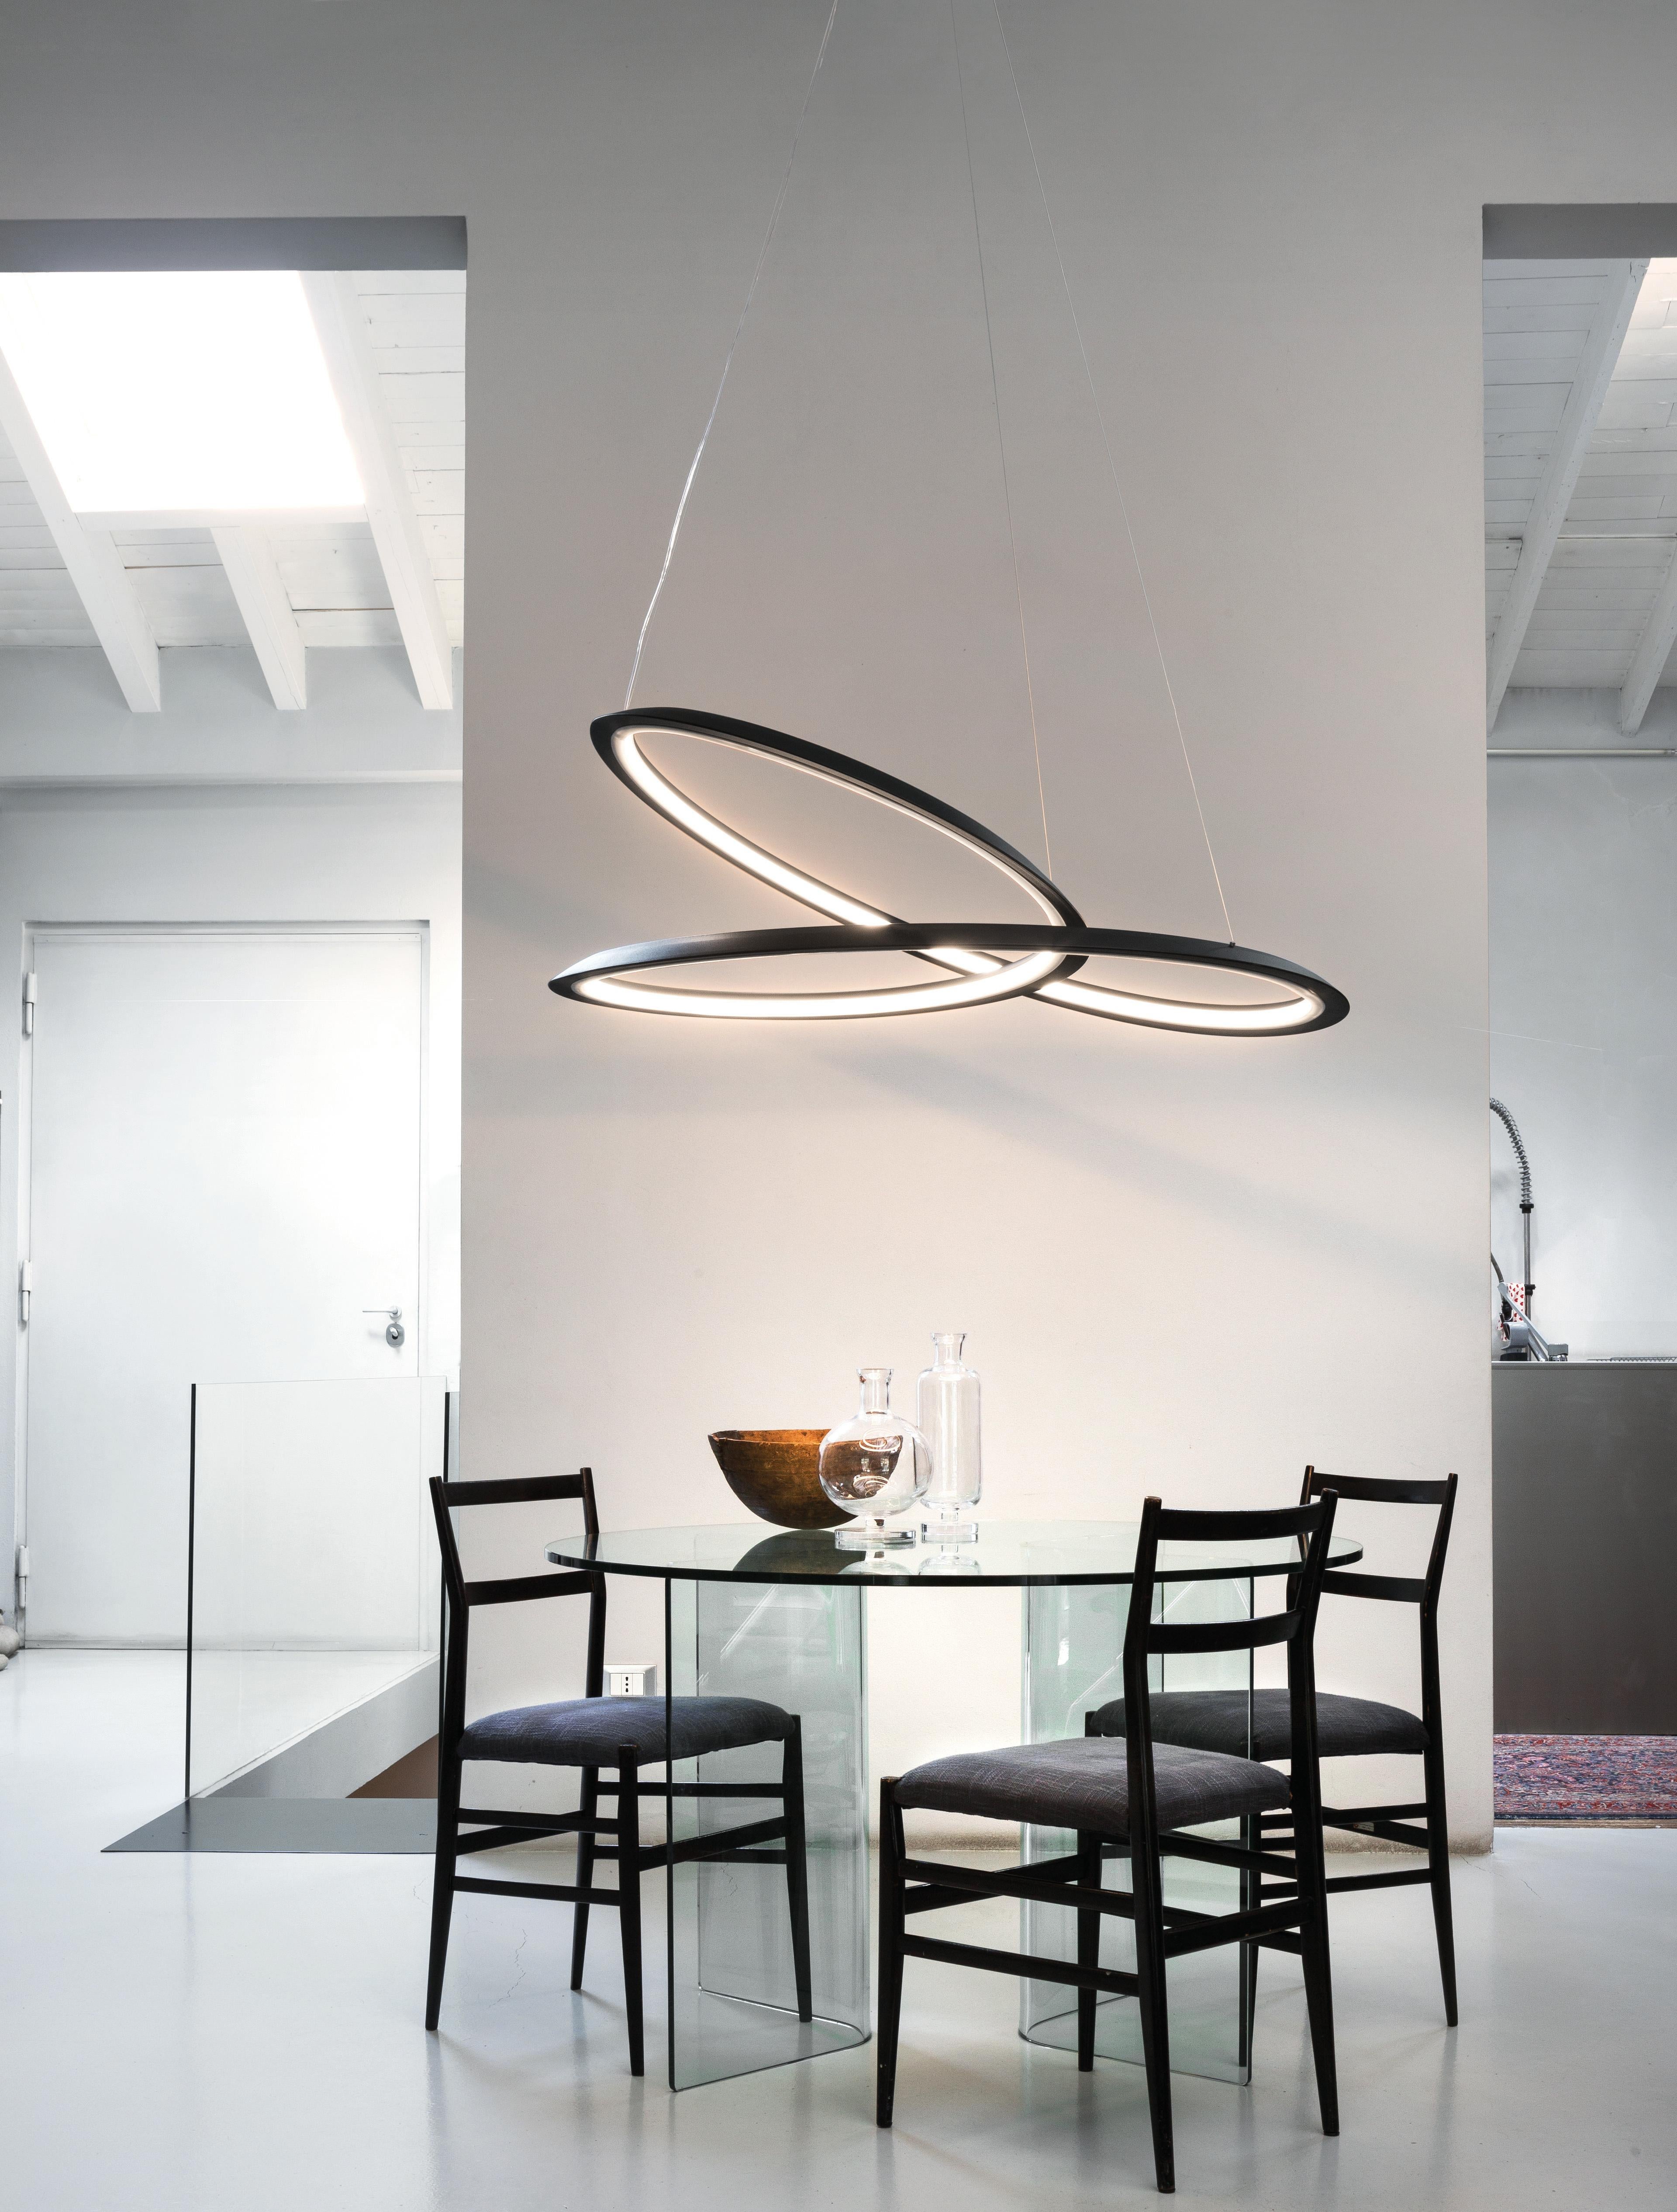 Adjustable cable length 8.2’ max
Linear LED direct 86W 4500lm typ cri 85 120V dimmable 1-10V IP 20 (indoor, dry location) 
uplight 3000K
Pendant lamp available in two sizes Kepler or Kepler Minor. The structure is a painted aluminum extrusion,